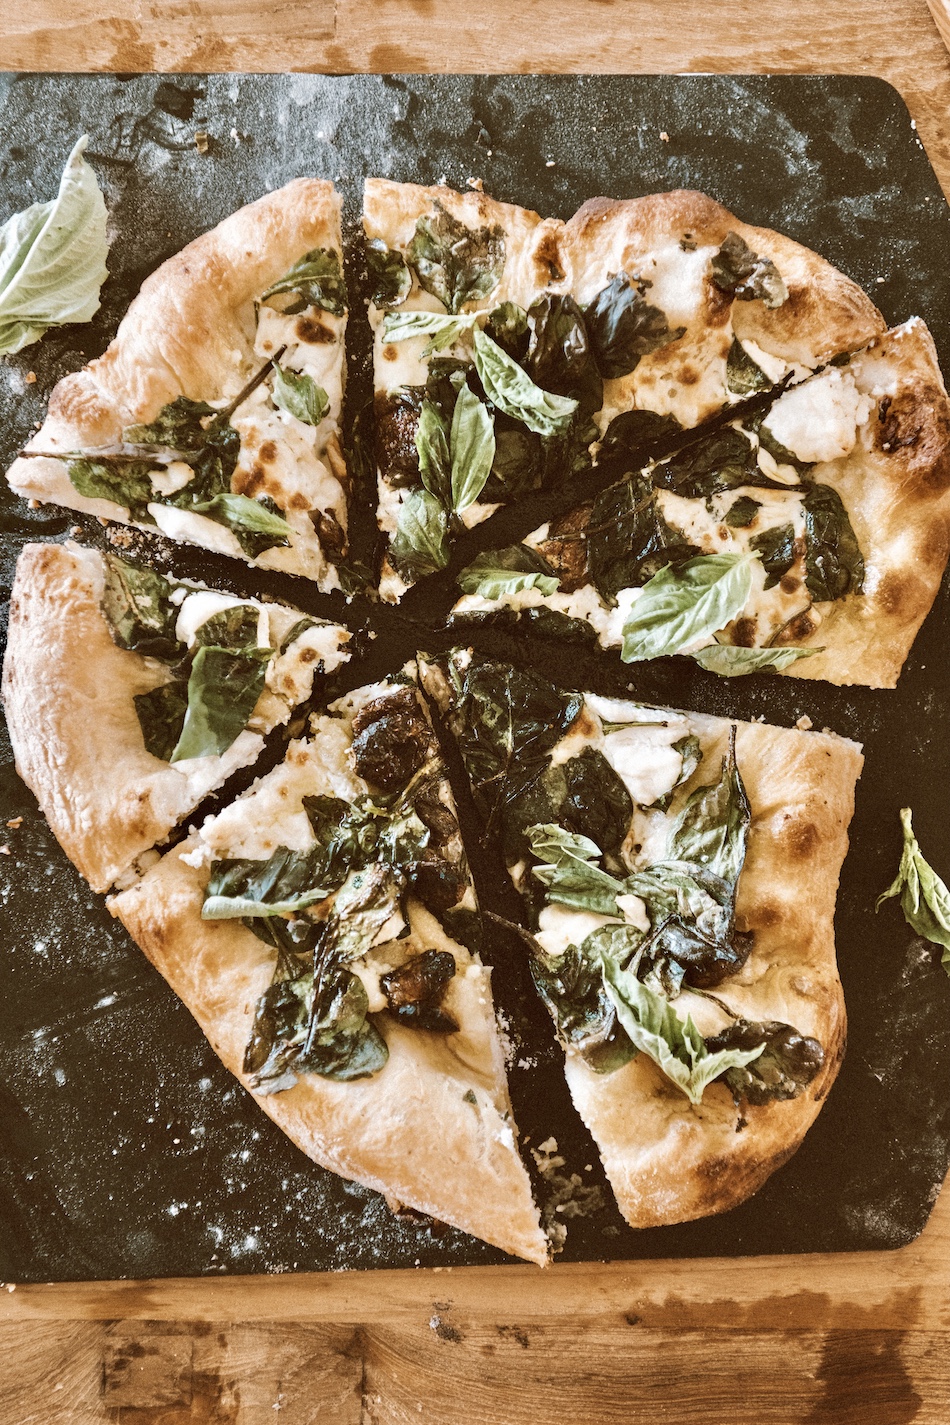 Camille Styles spinach ricotta homemade pizza recipe baked in oven on pizza stone